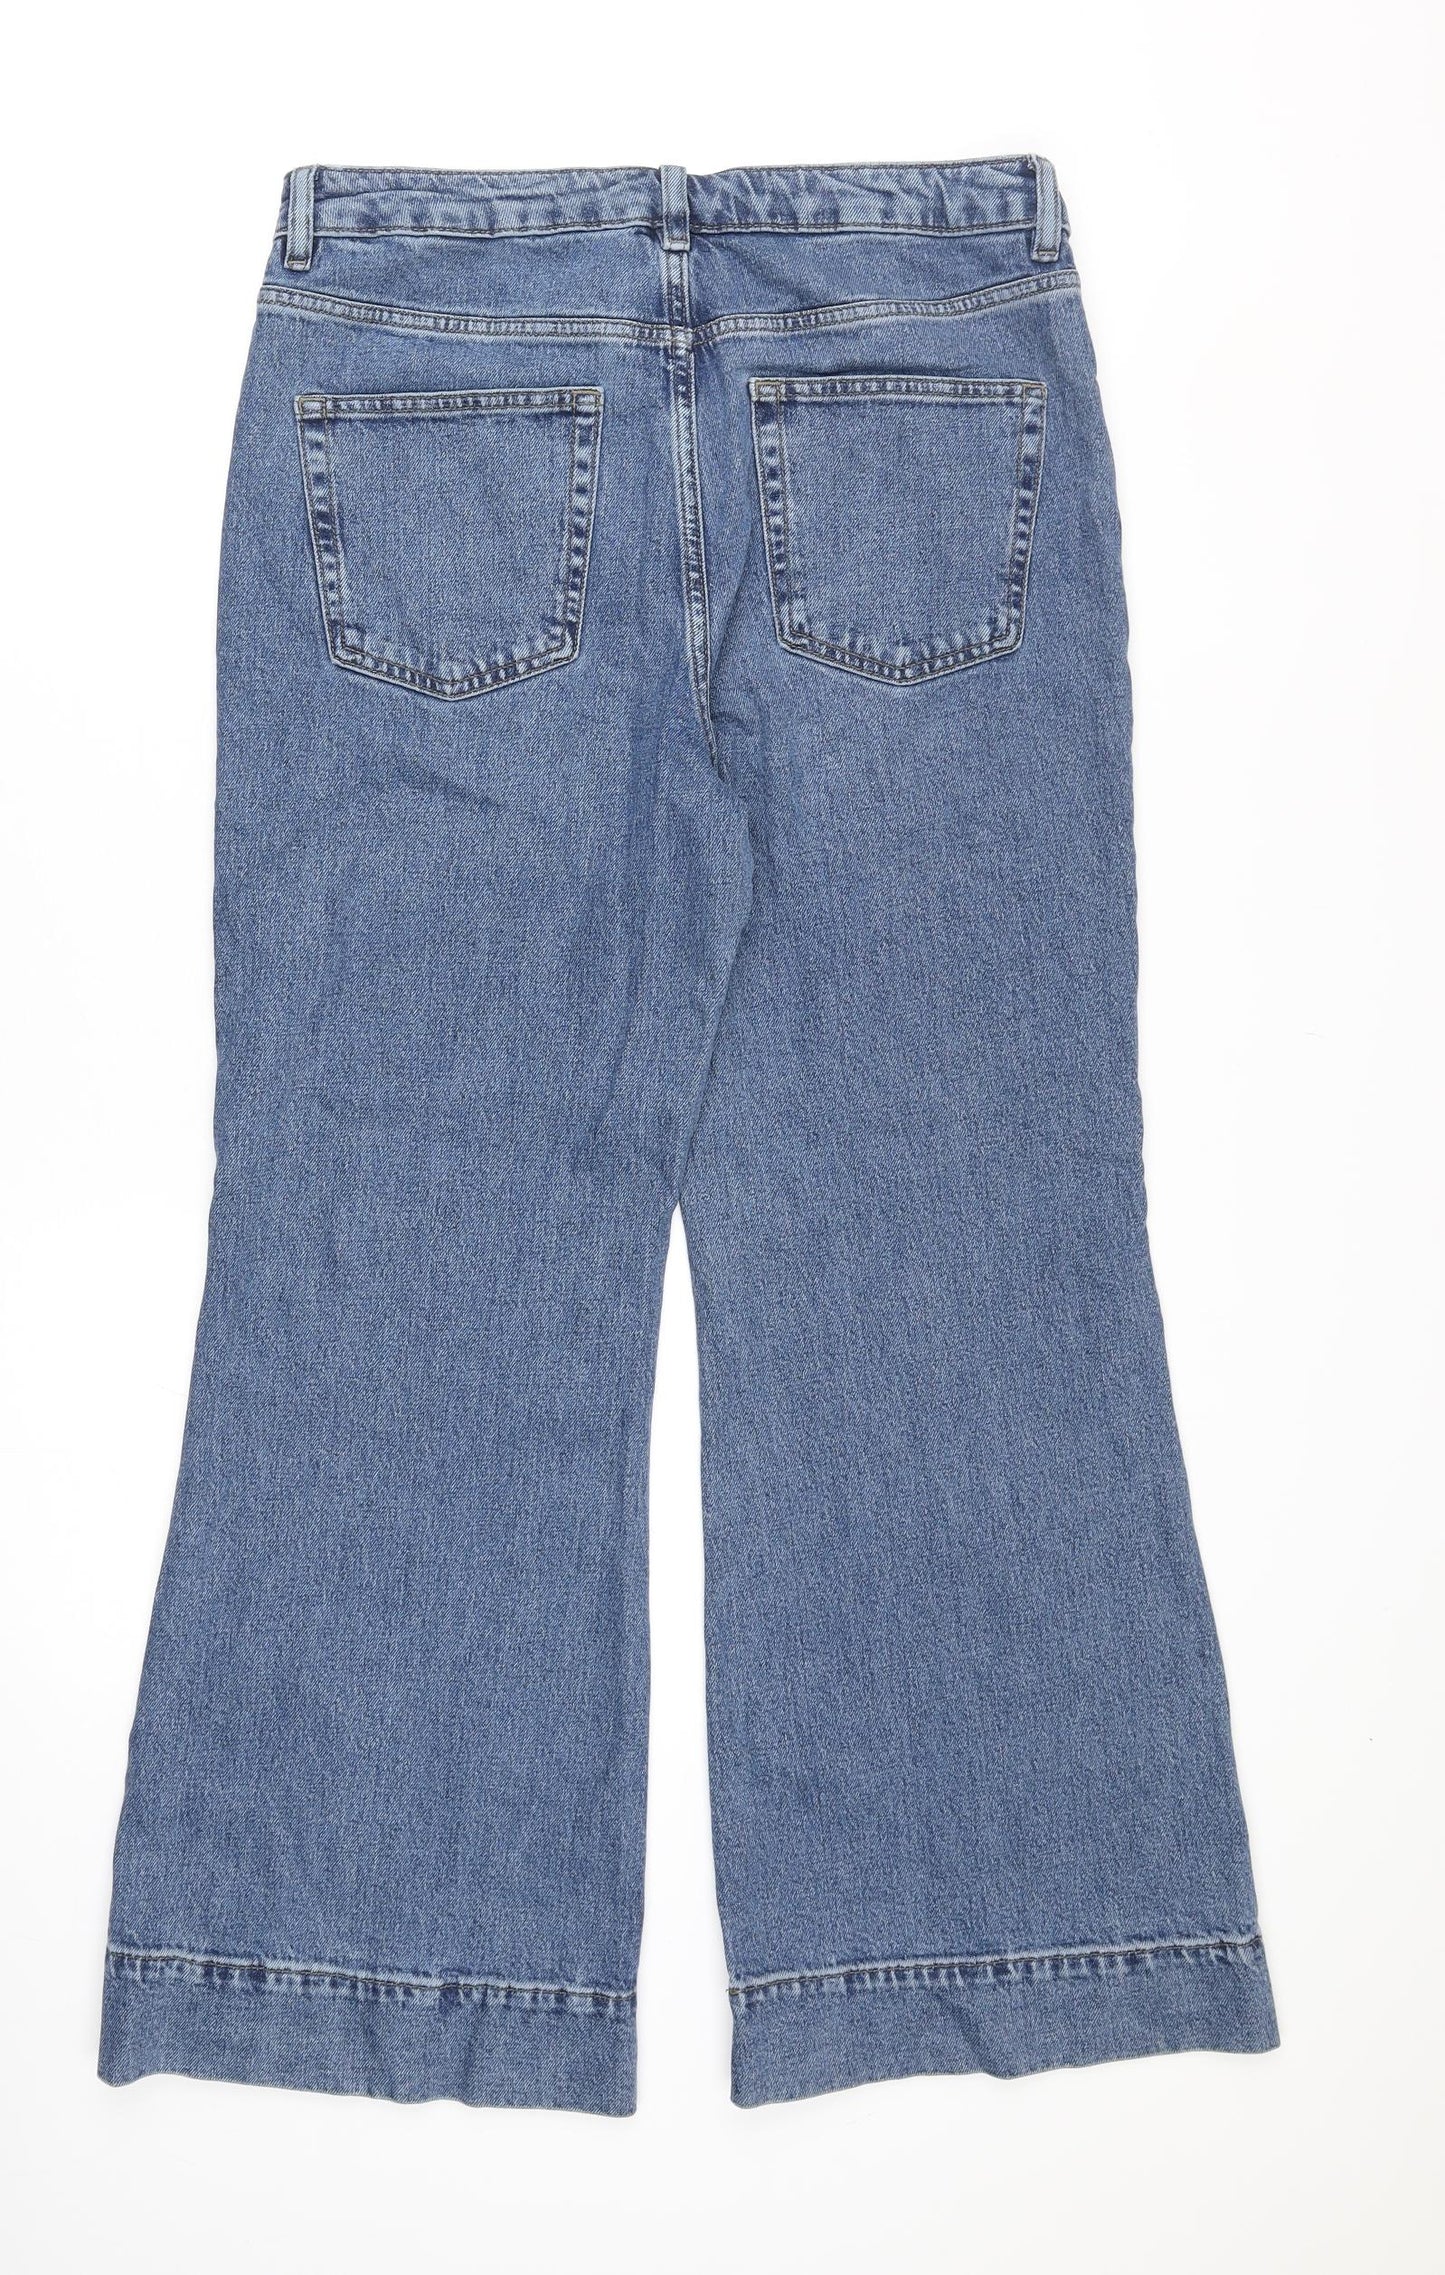 Marks and Spencer Womens Blue Cotton Flared Jeans Size 14 Regular Zip